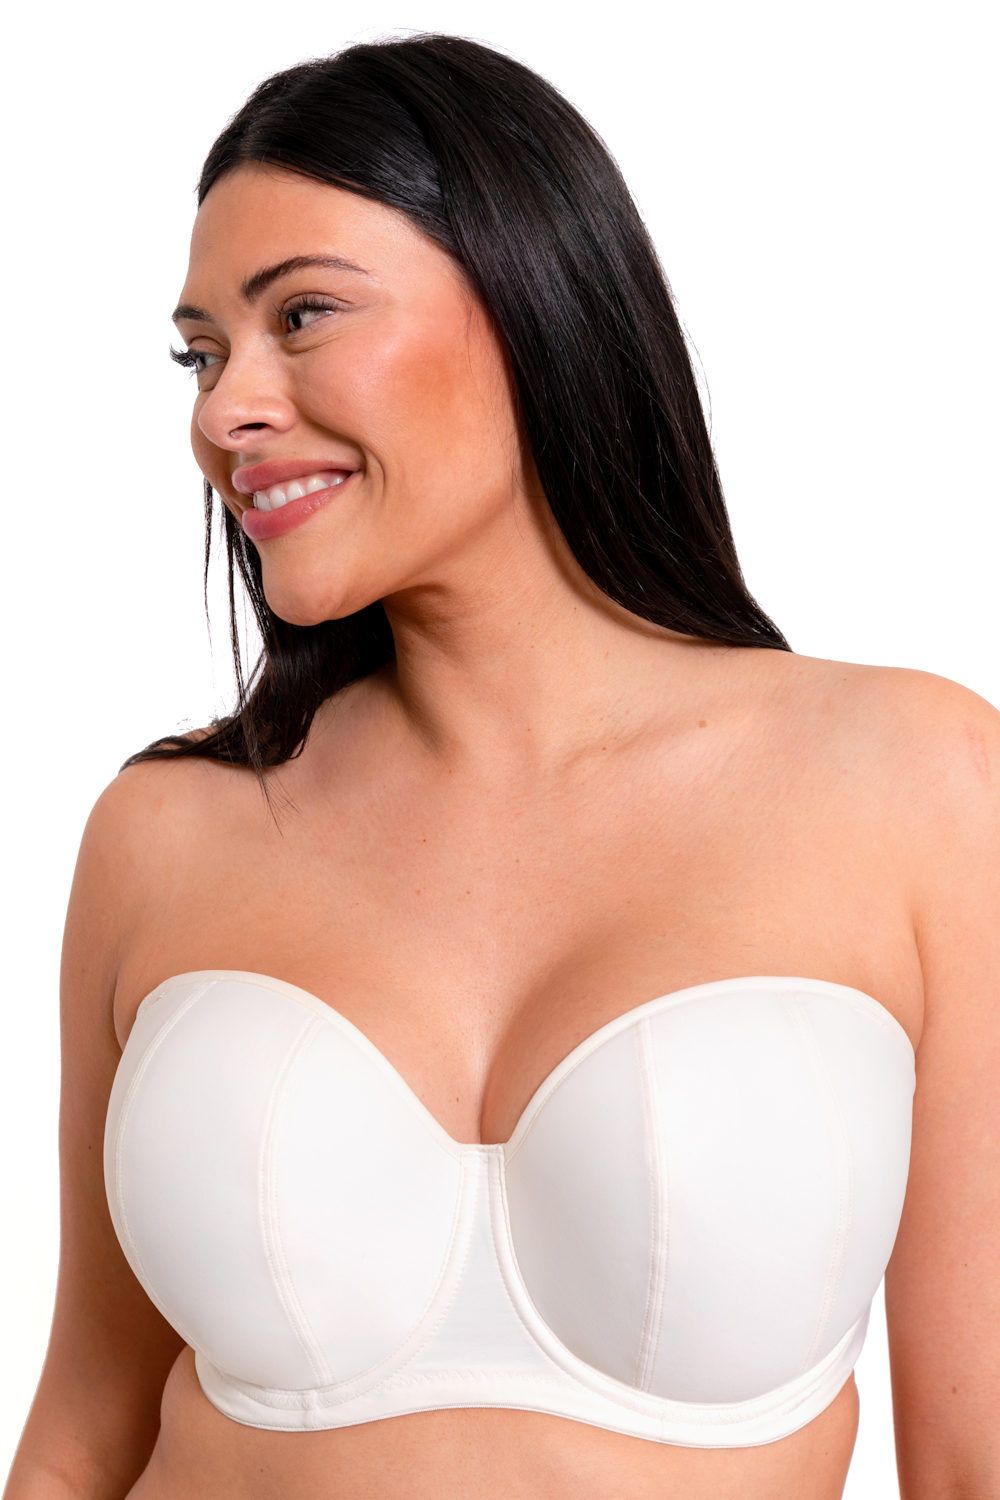 Uplift your life with the correct fitting bra – Curvy Kate UK